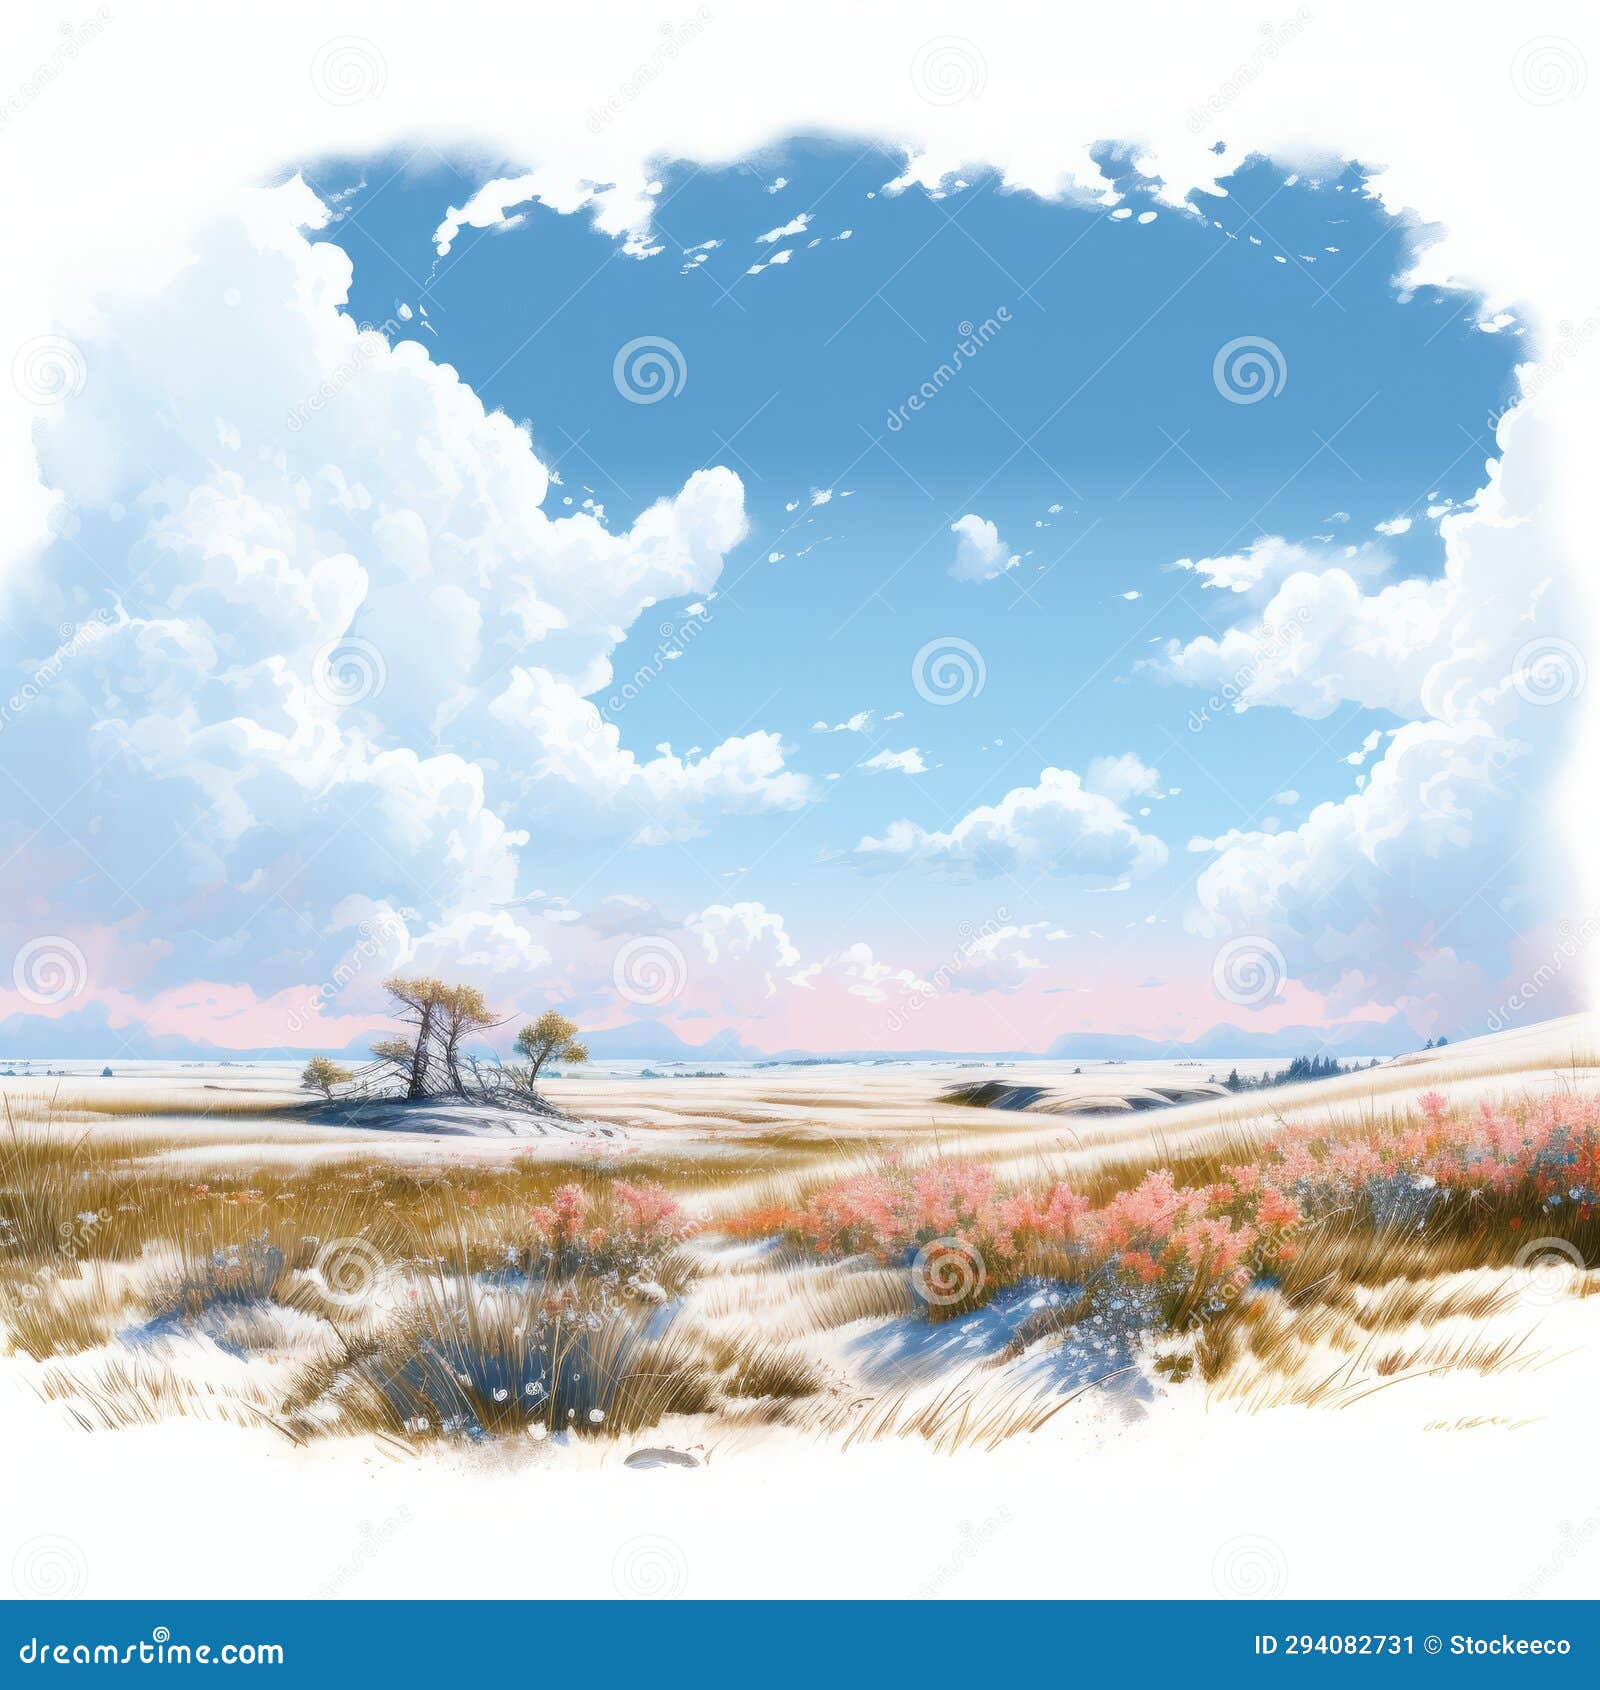 snowy prairie: a romanticized view of blooming flowers and trees